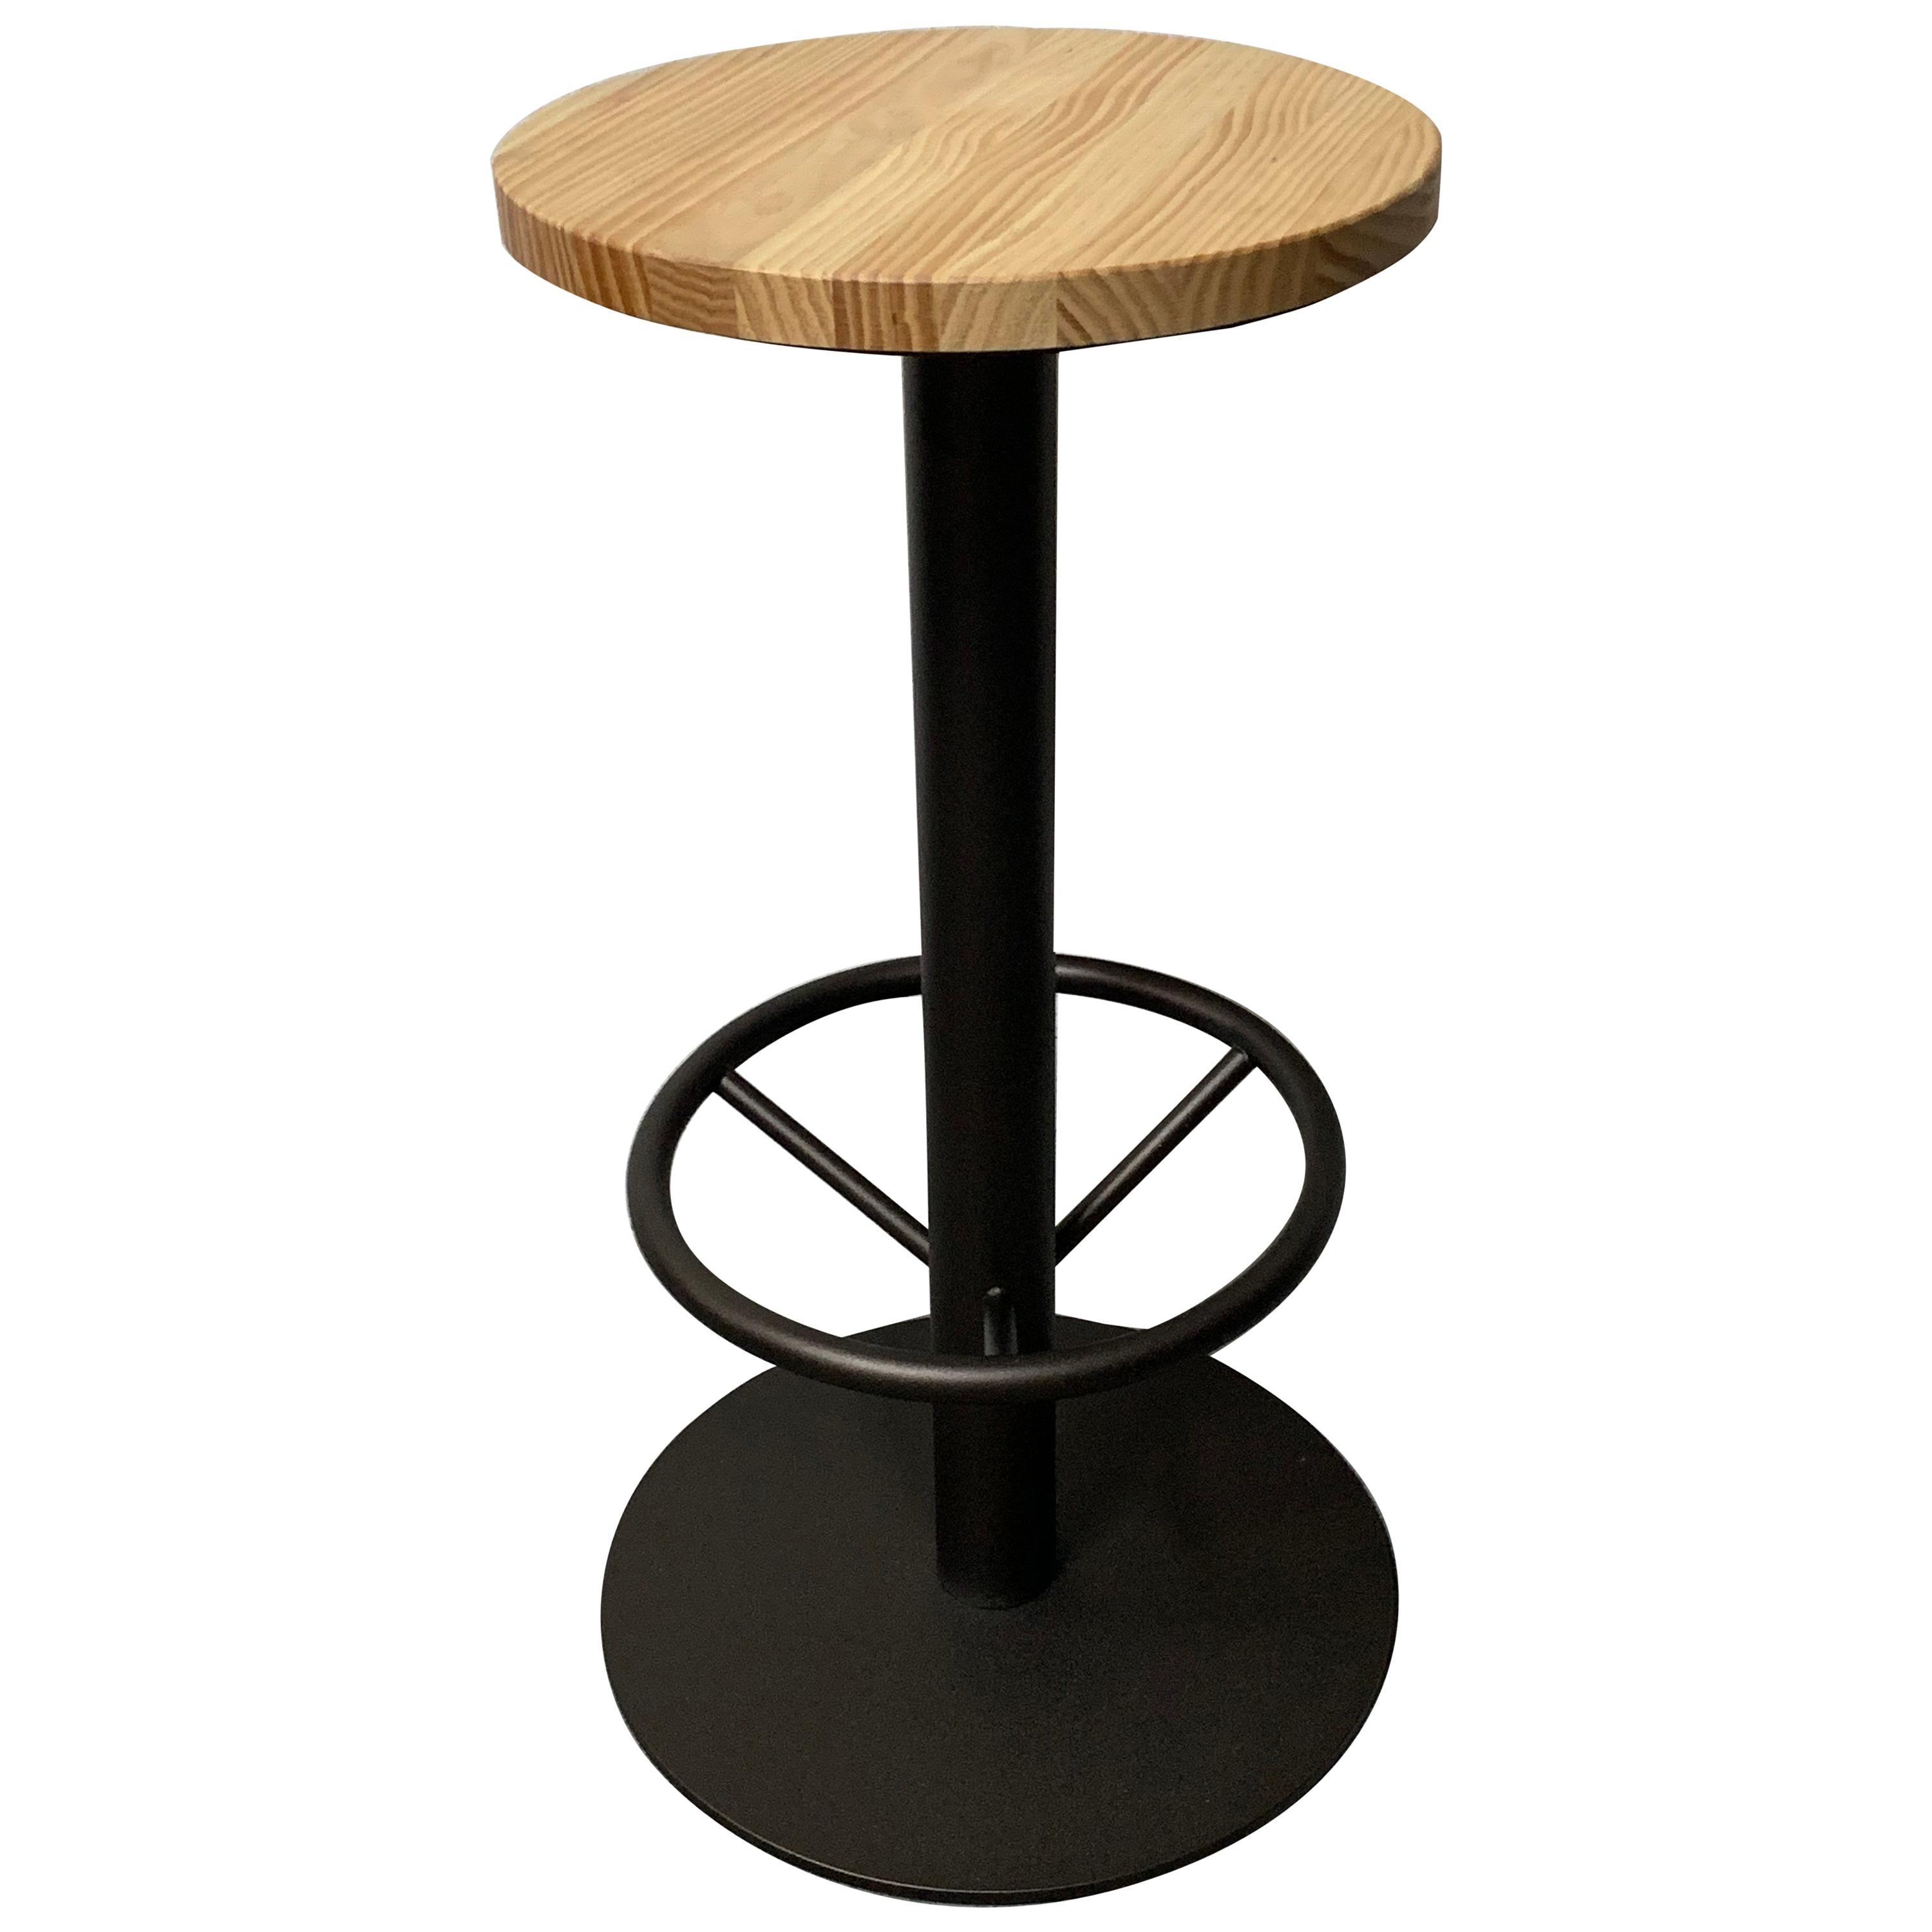 New Industrial Wrought Iron Shop Stool with Pine Wood Seat